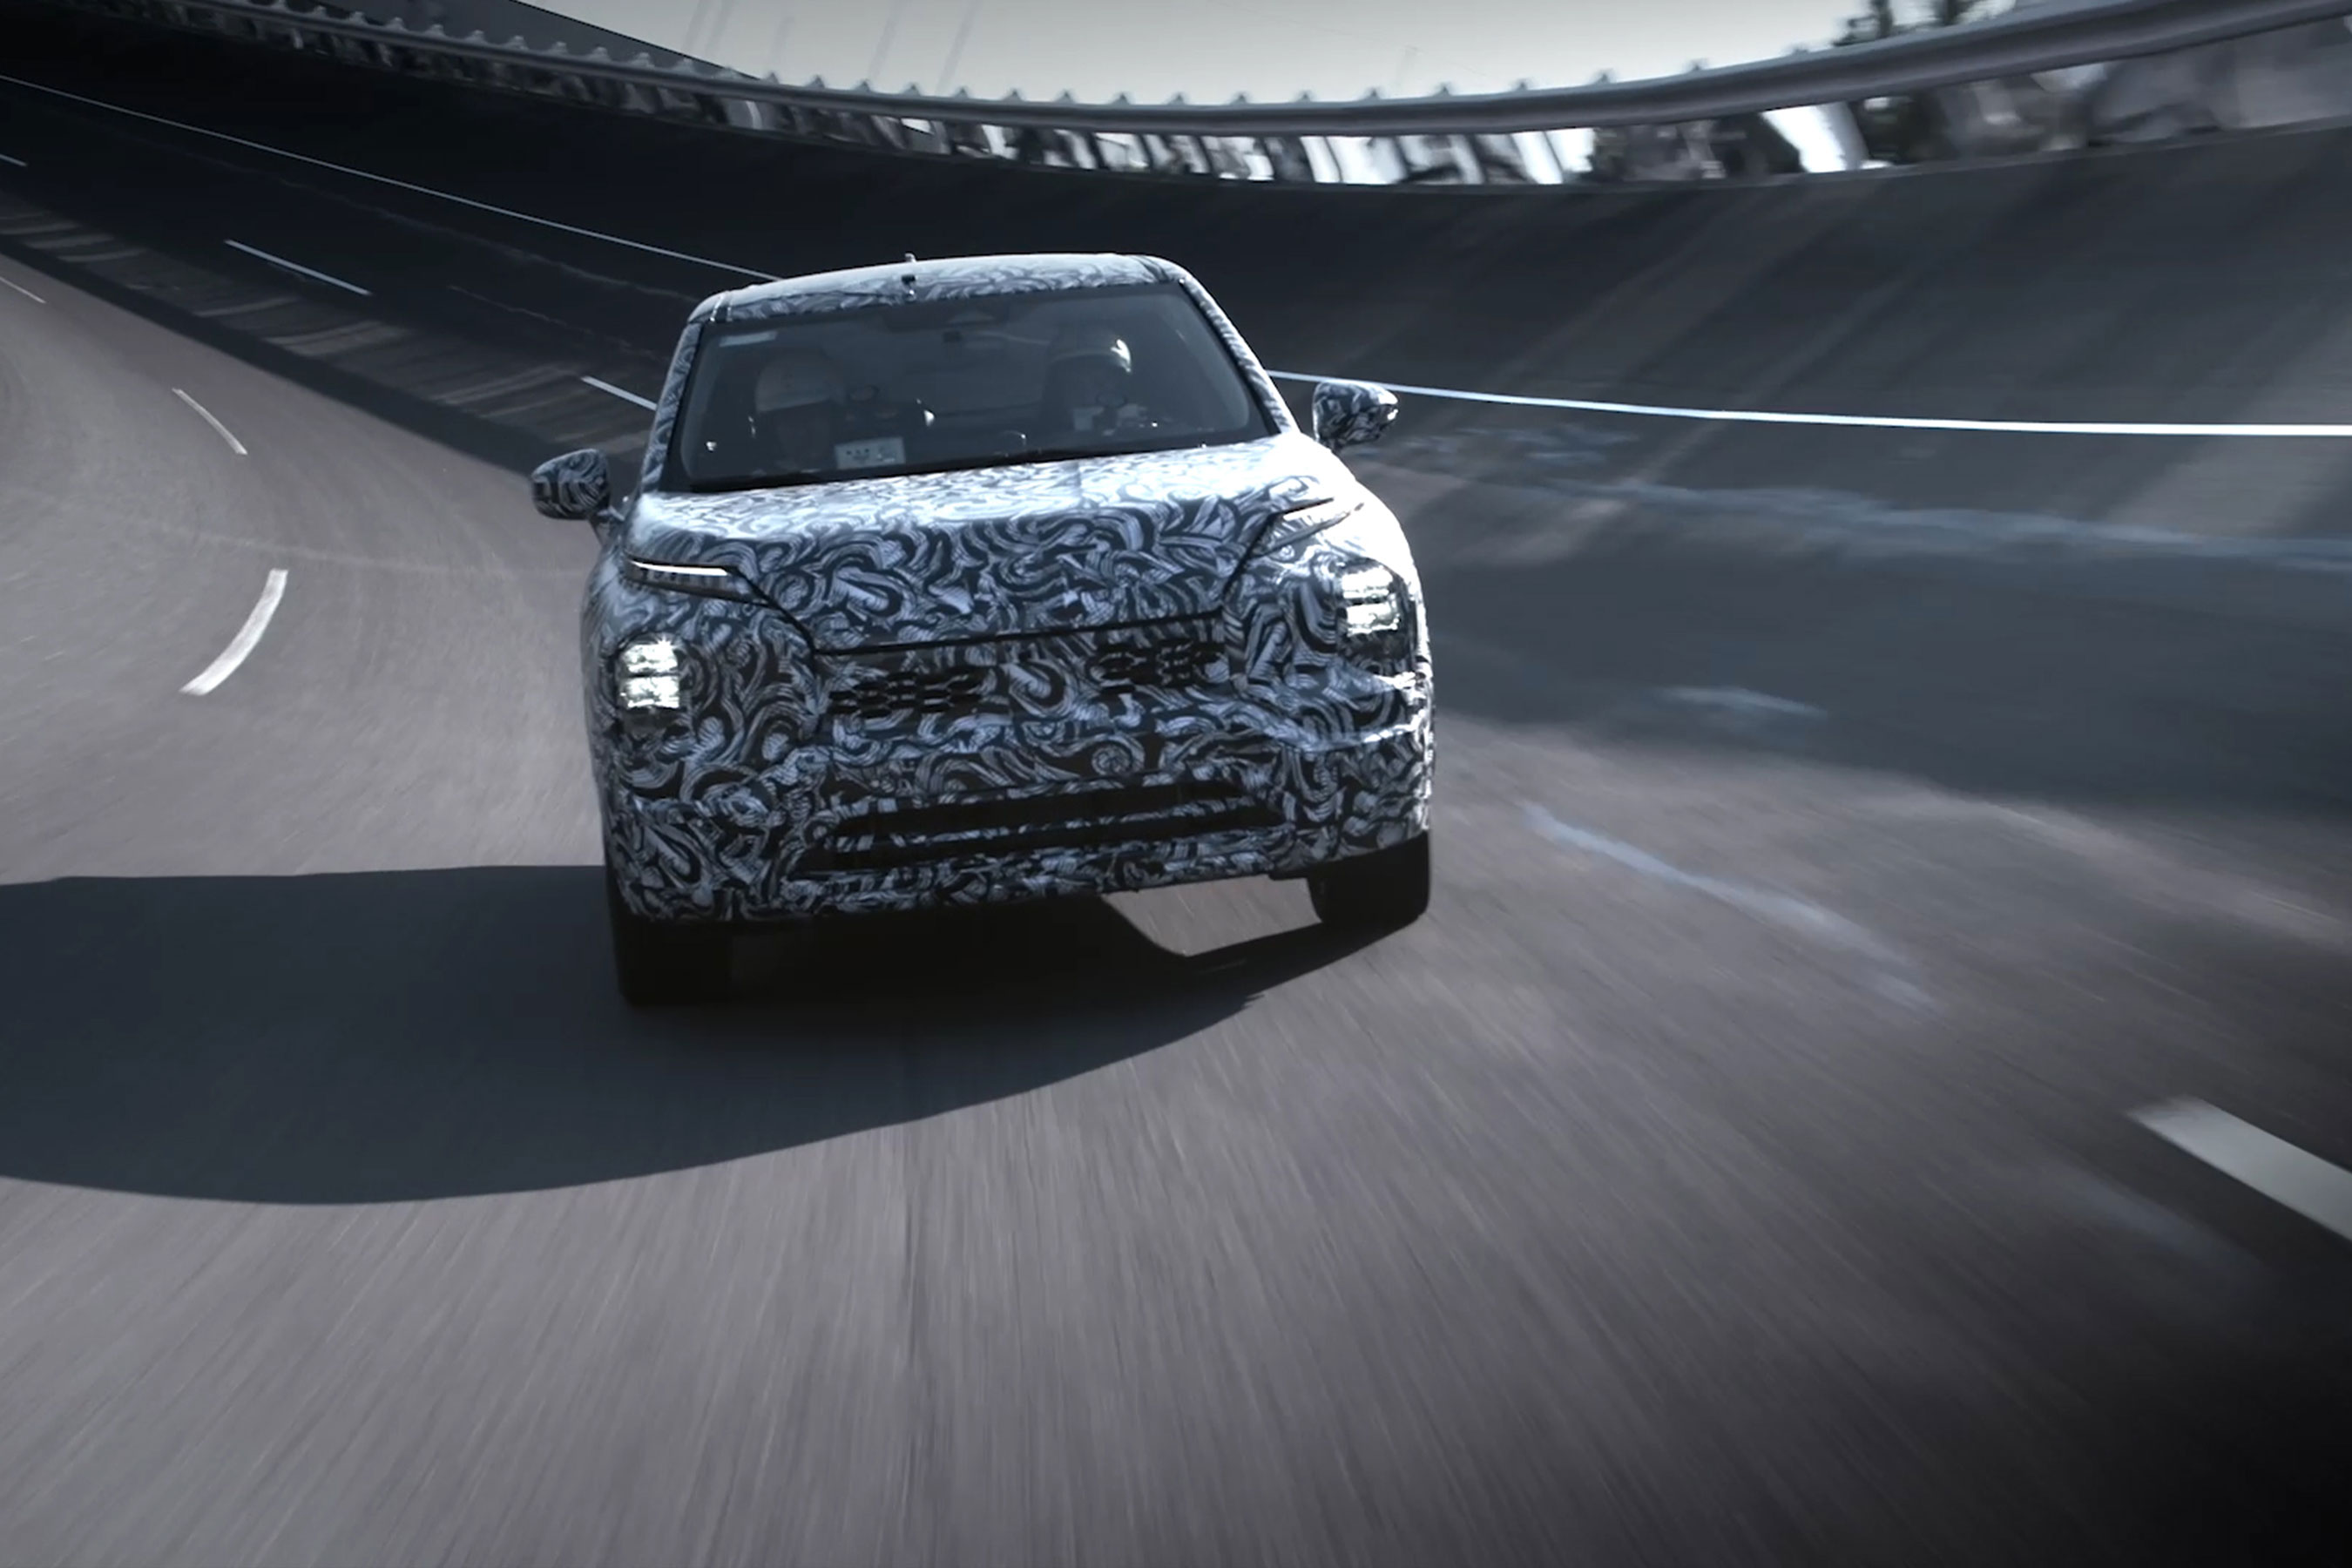 Mitsubishi Motors provides exclusive look at the all-new 2022 Outlander undergoing final testing.